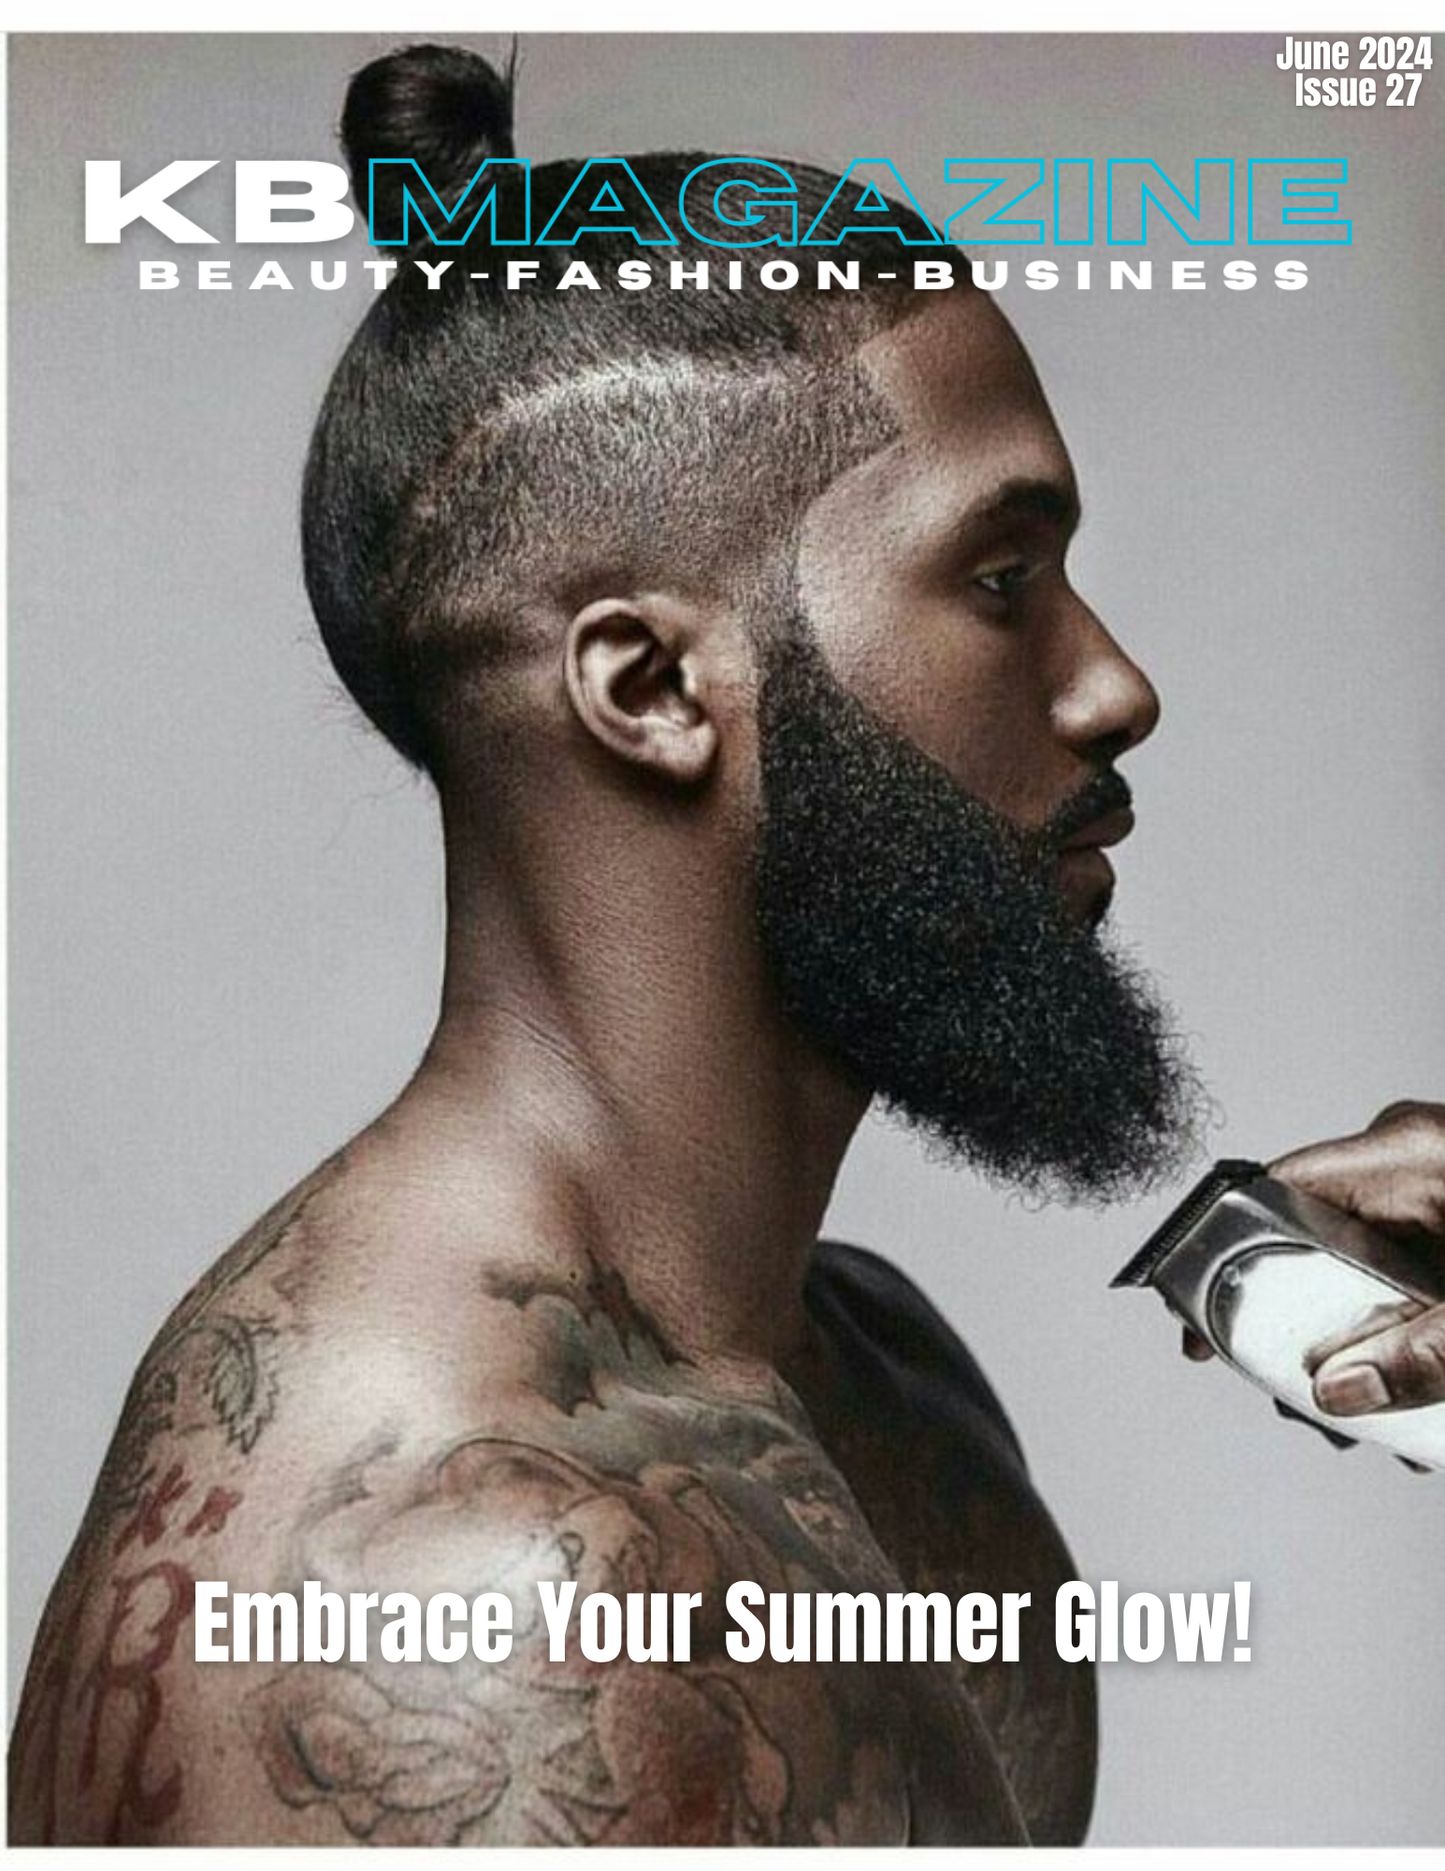 KB Magazine: July 2024 (Issue 28)|Digital Magazine| Natural Hair Care| Nail Care|Fashion Tips|Luxury Lifestyle |Business Essentials